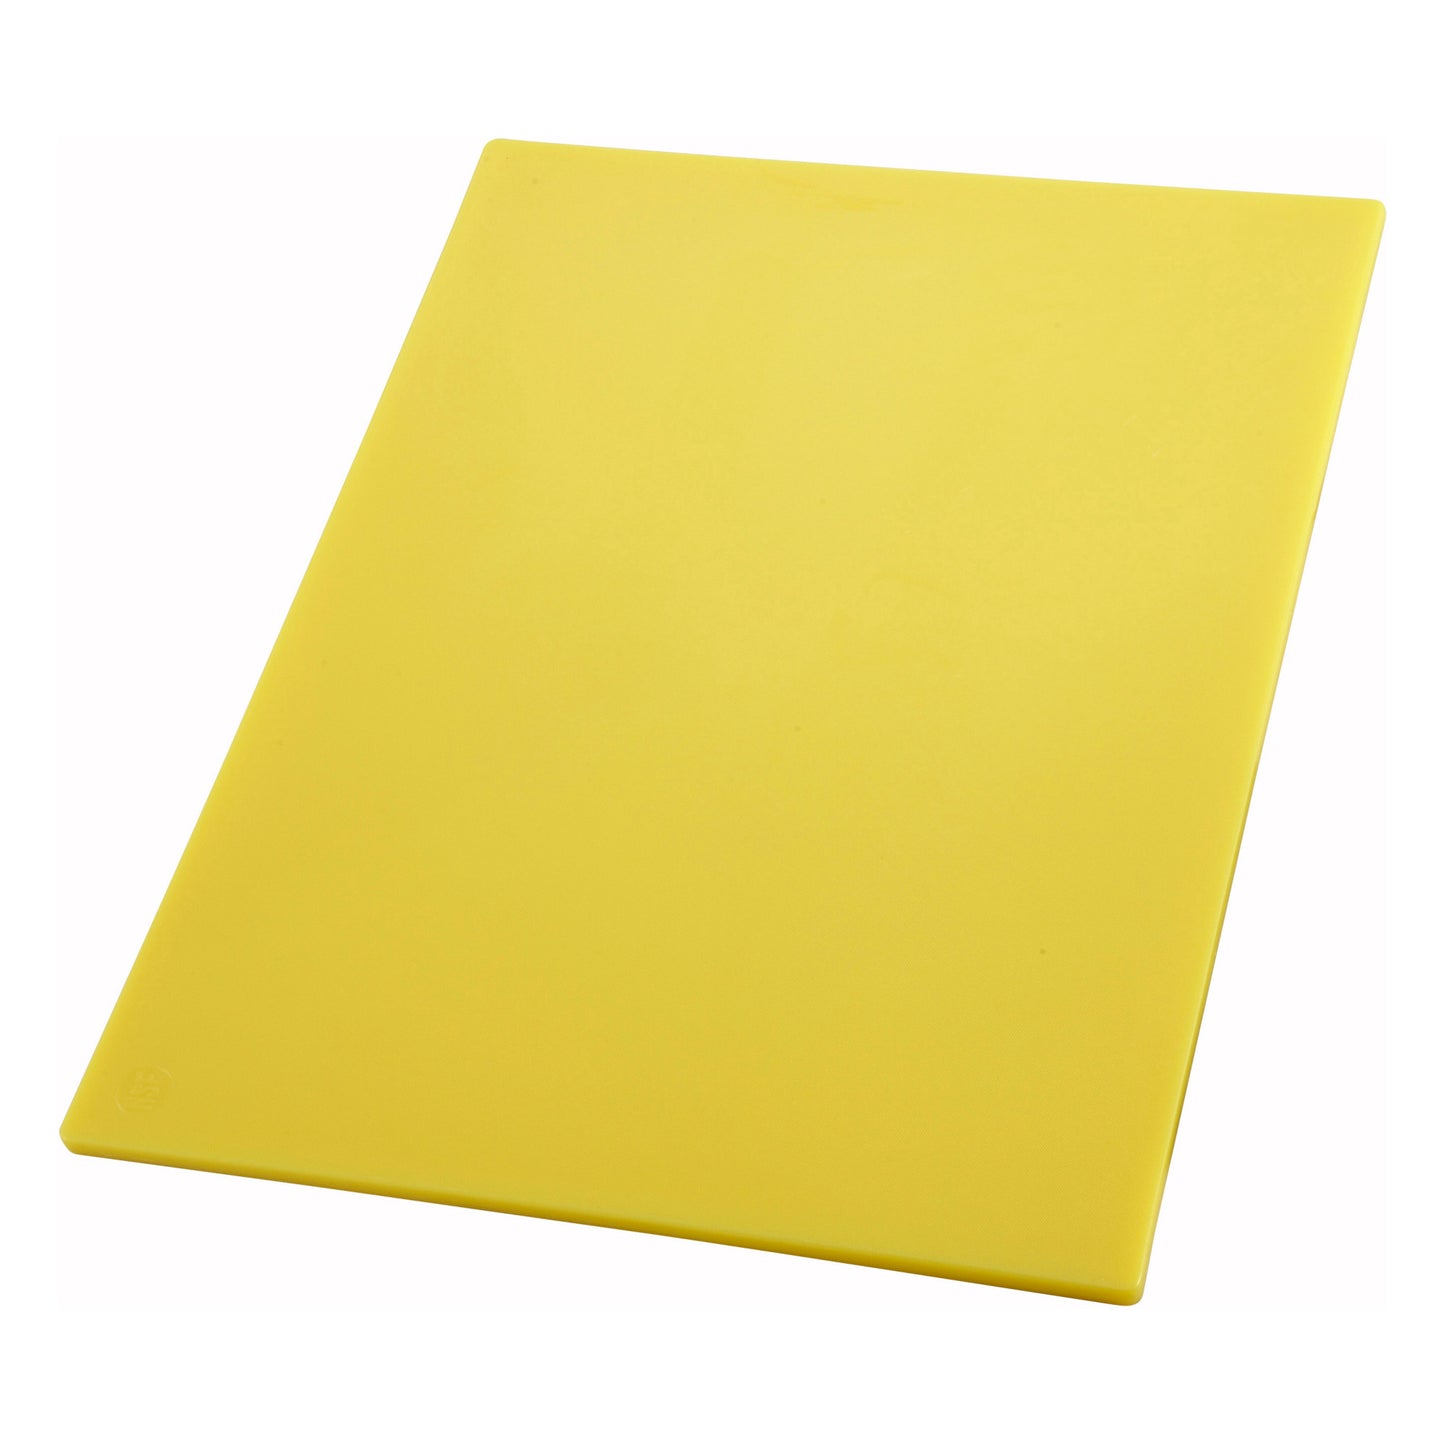 CBYL-1218 - HACCP Color-Coded Cutting Board - 12 x 18, Yellow